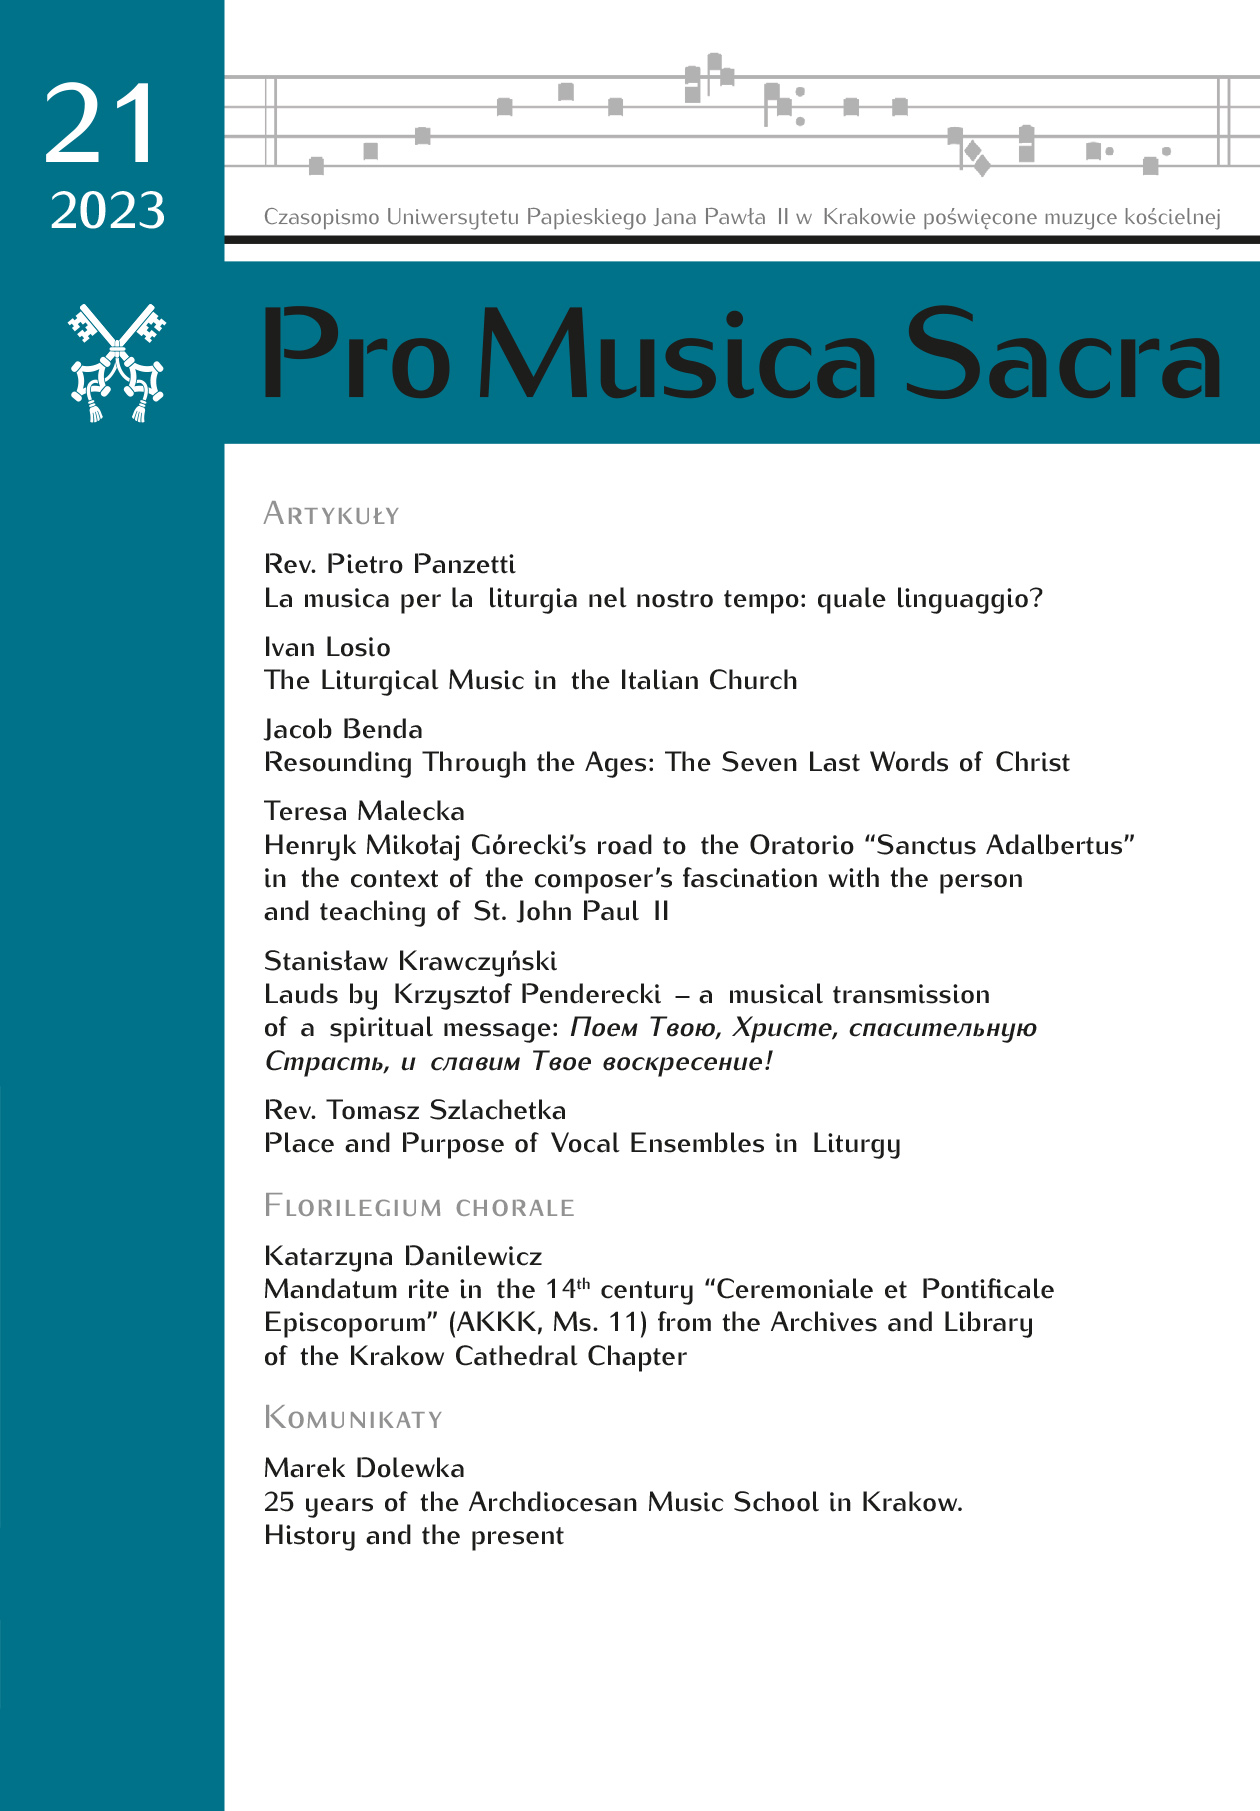 Henryk Mikołaj Górecki’s road to the Oratorio “Sanctus Adalbertus” in the context of the composer’s fascination with the person and teaching of St. John Paul II Cover Image